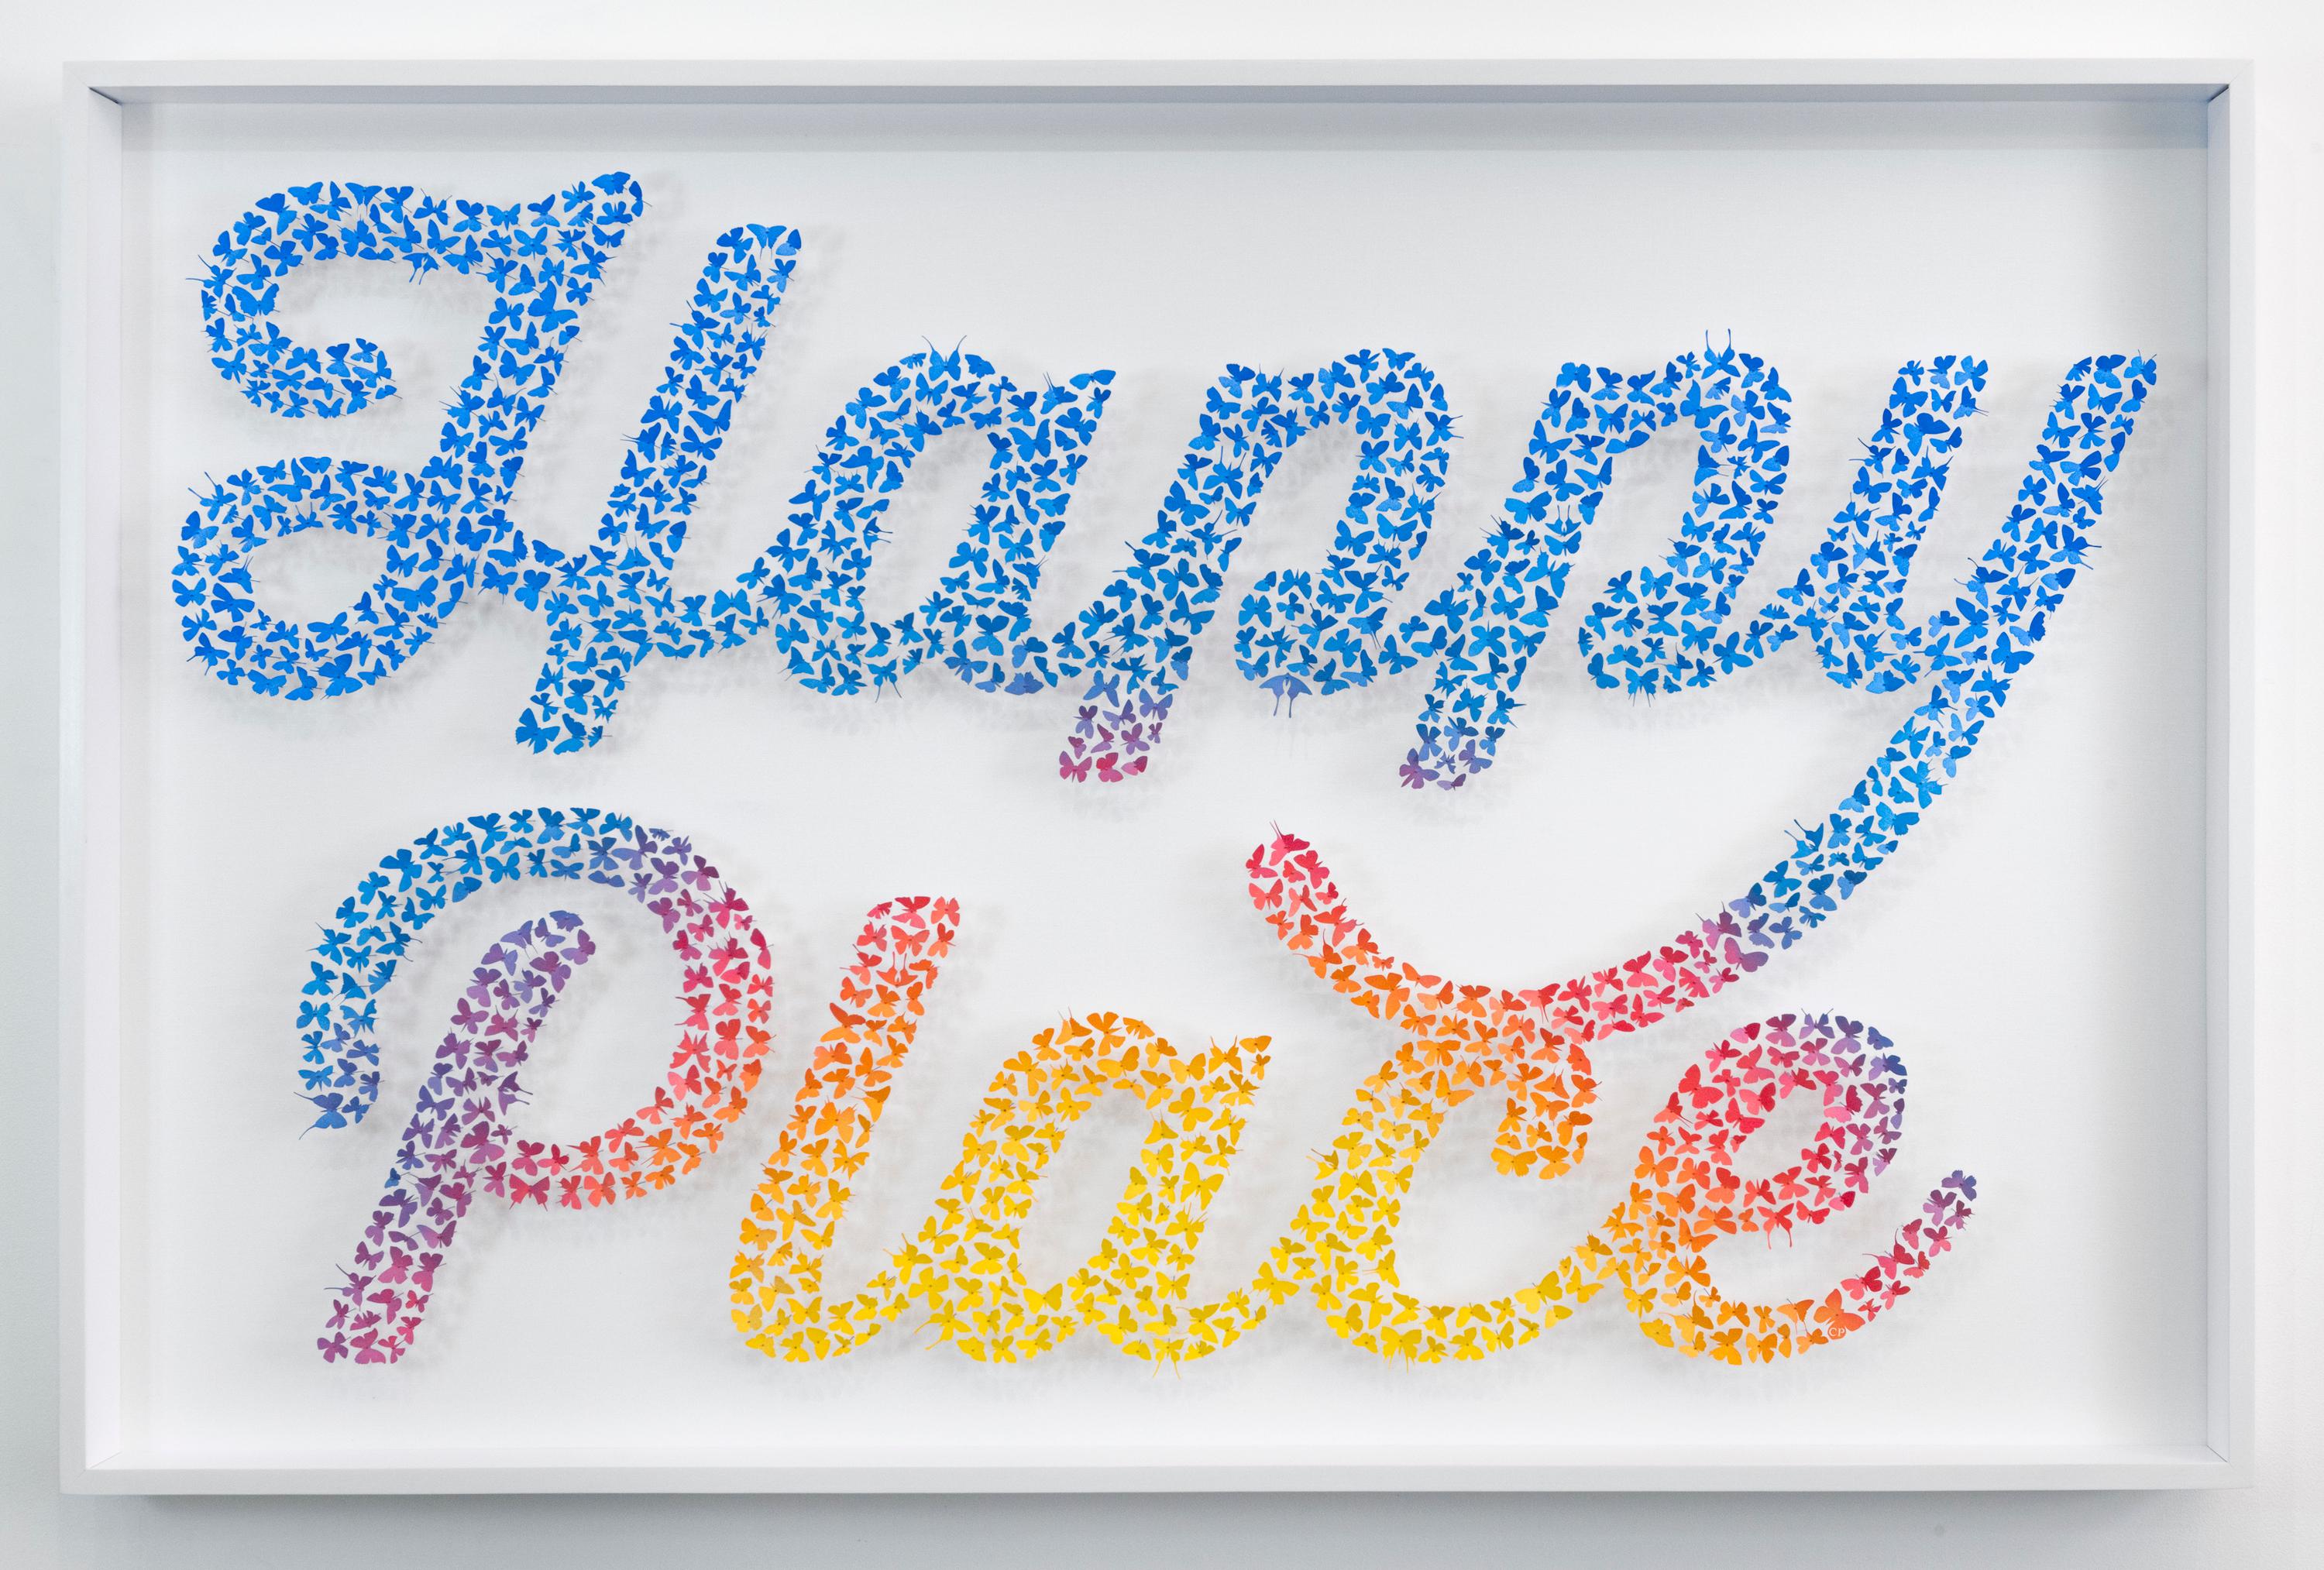 This work is sourced directly from the artist.
Butterflies cut from paper, arranged in the shape of the word HAPPY PLACE, and pinned with stainless steel entomology pins to white canvas. Framed in a clear, plexiglass box.

Available Sizes (Framed